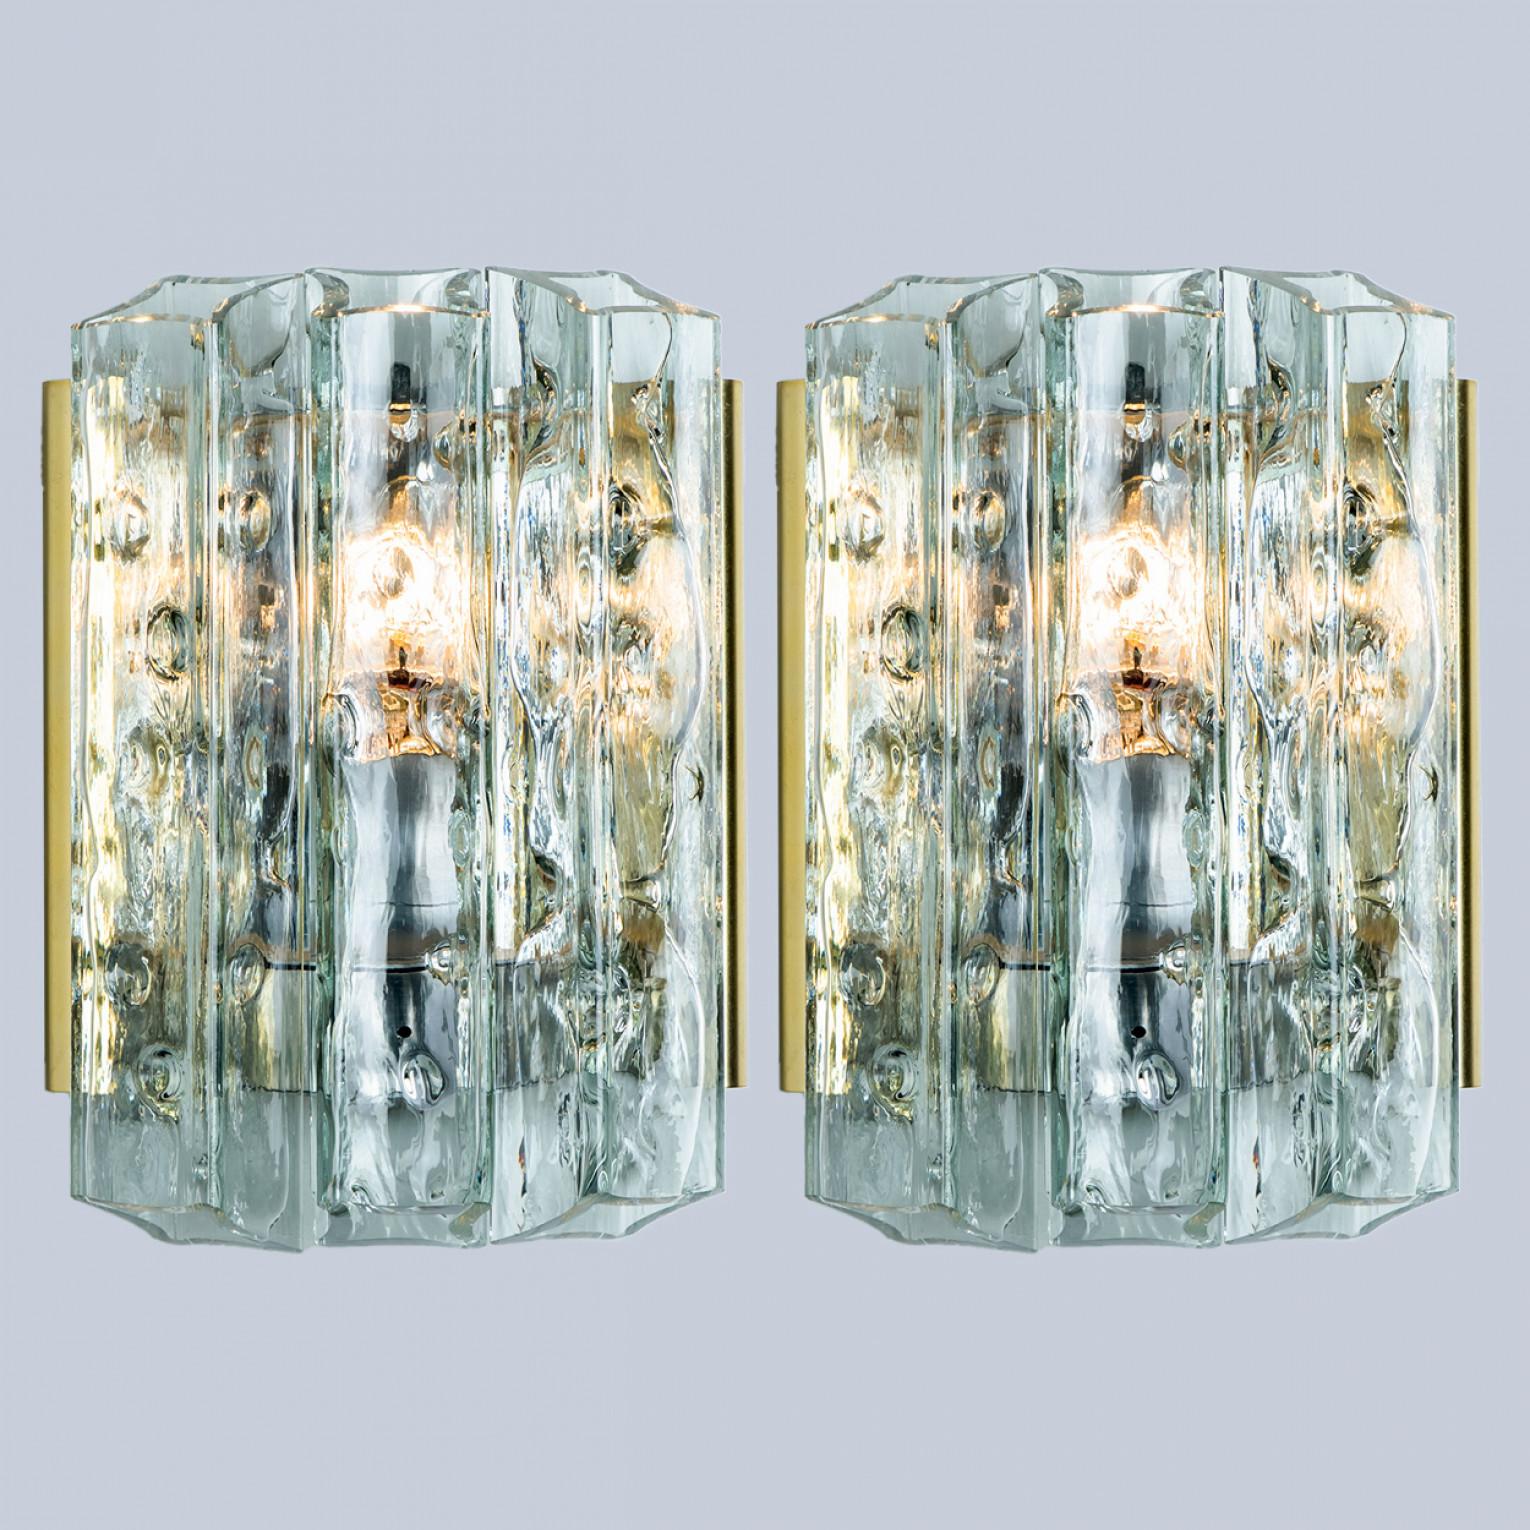 Other Pair of Faceted Tubes Wall Lights by Doria Leuchten, 1960s For Sale